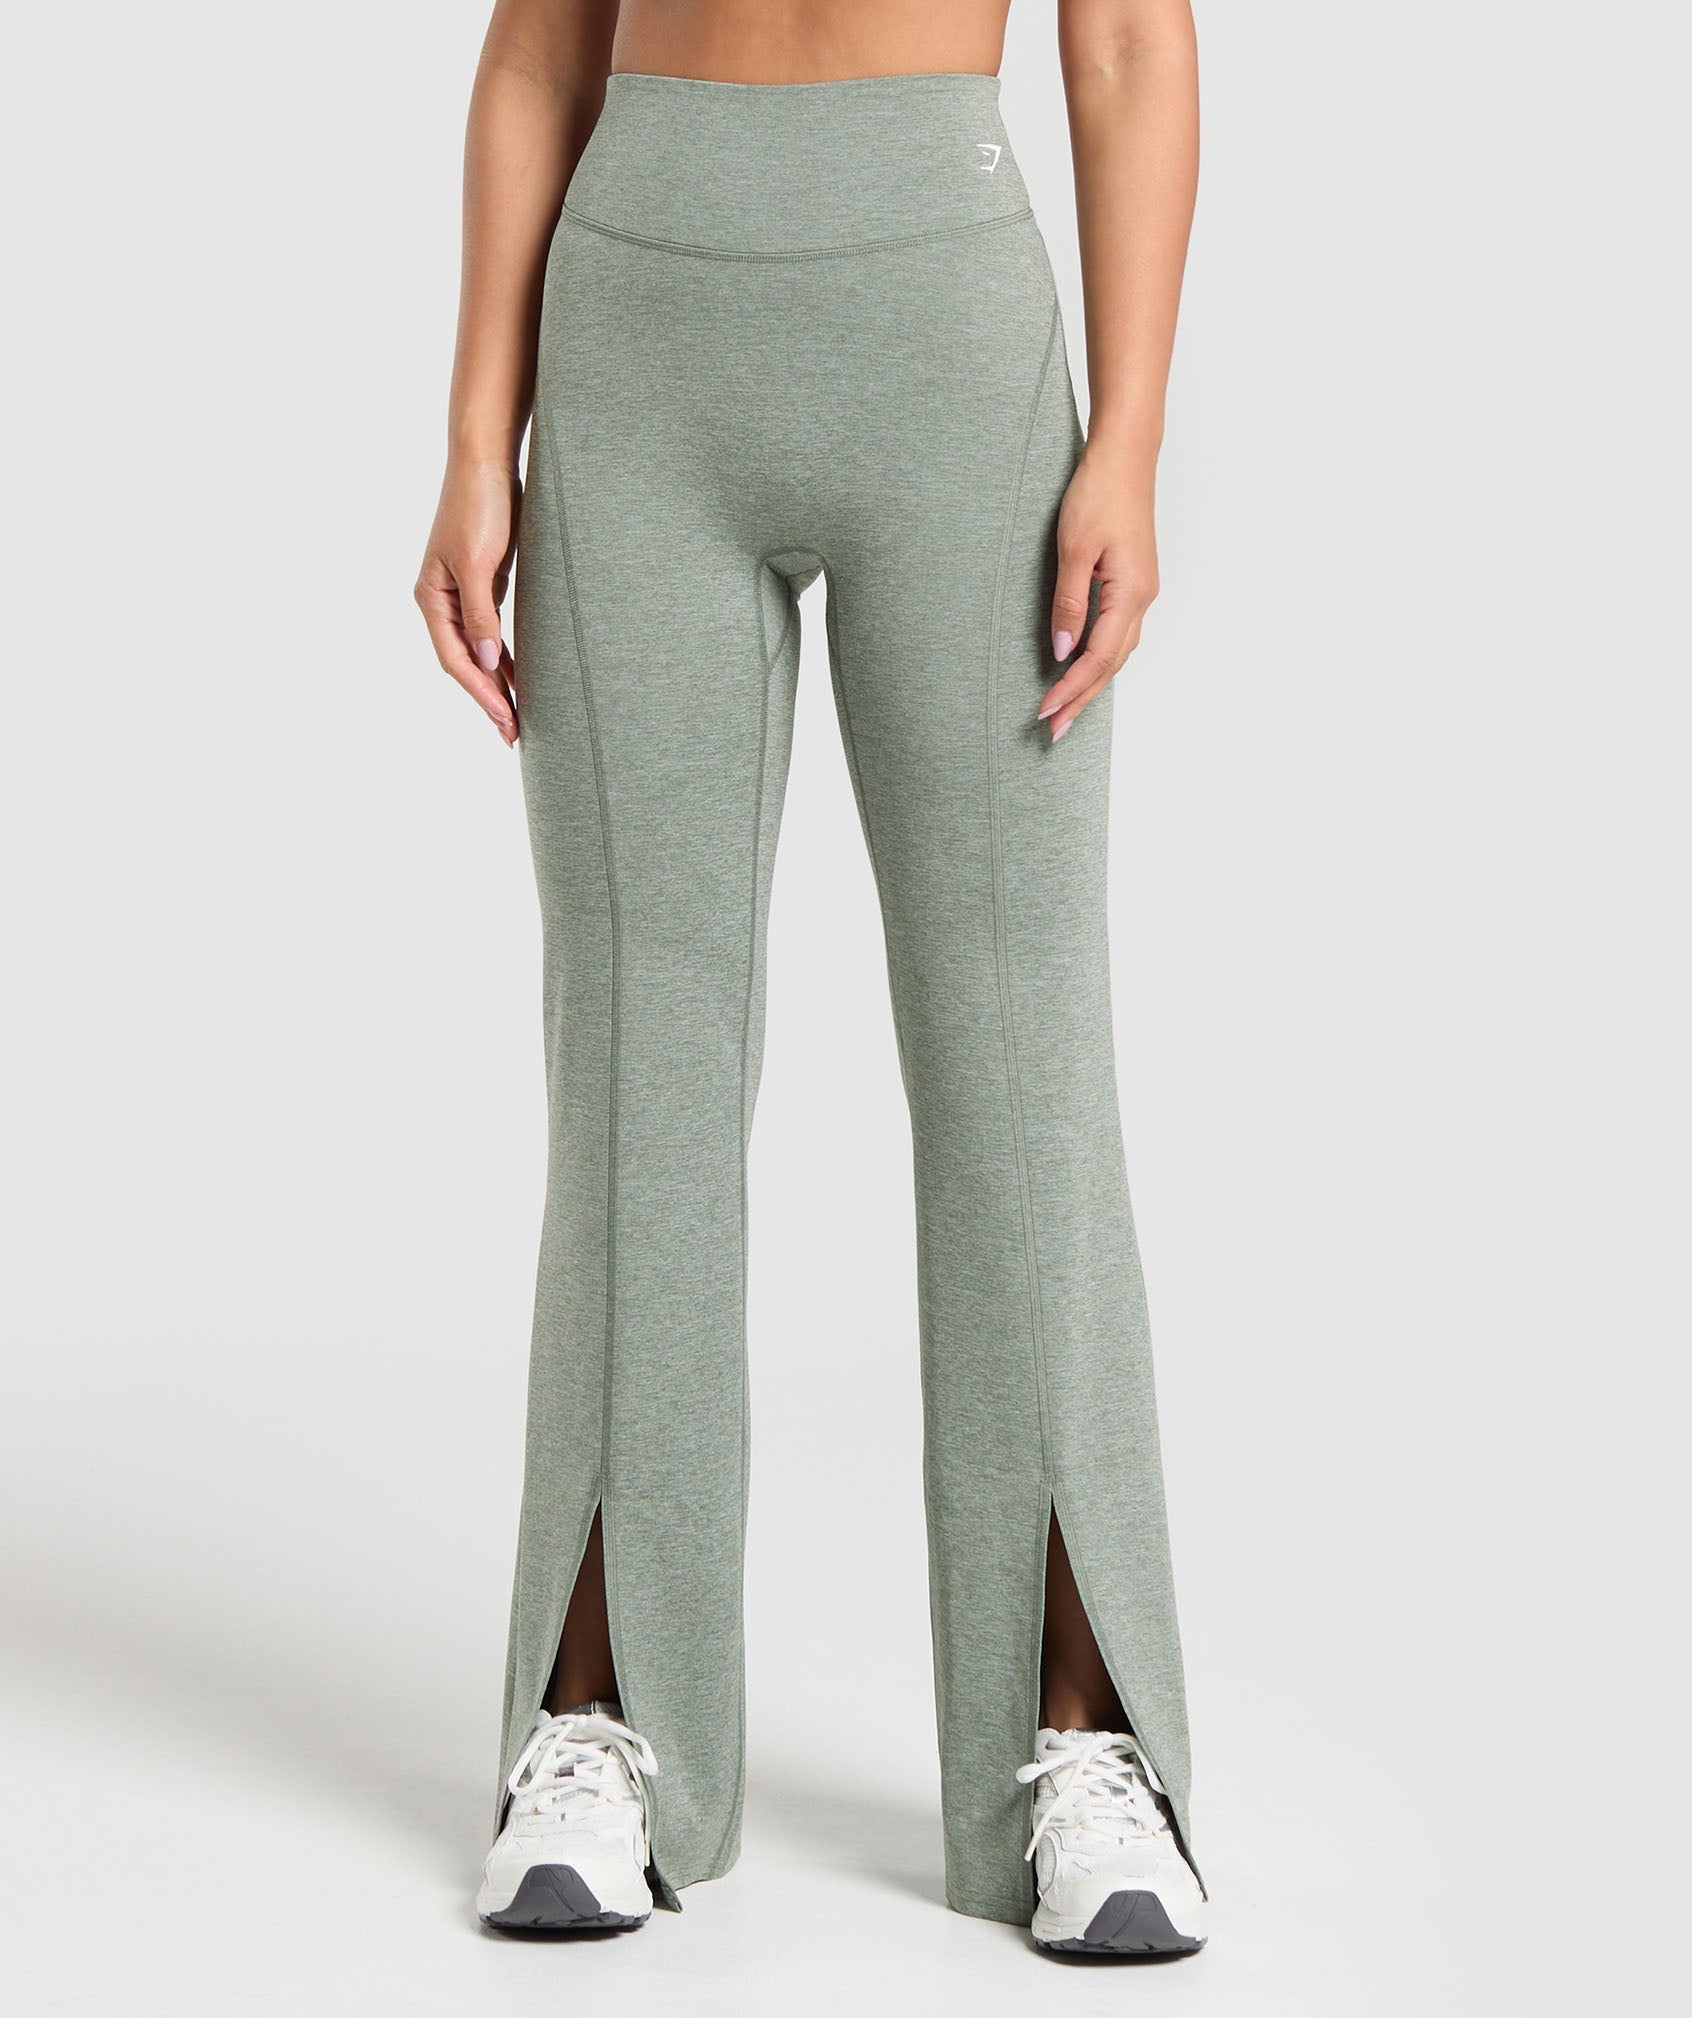 Marl Flared Leggings in Unit Green - view 1